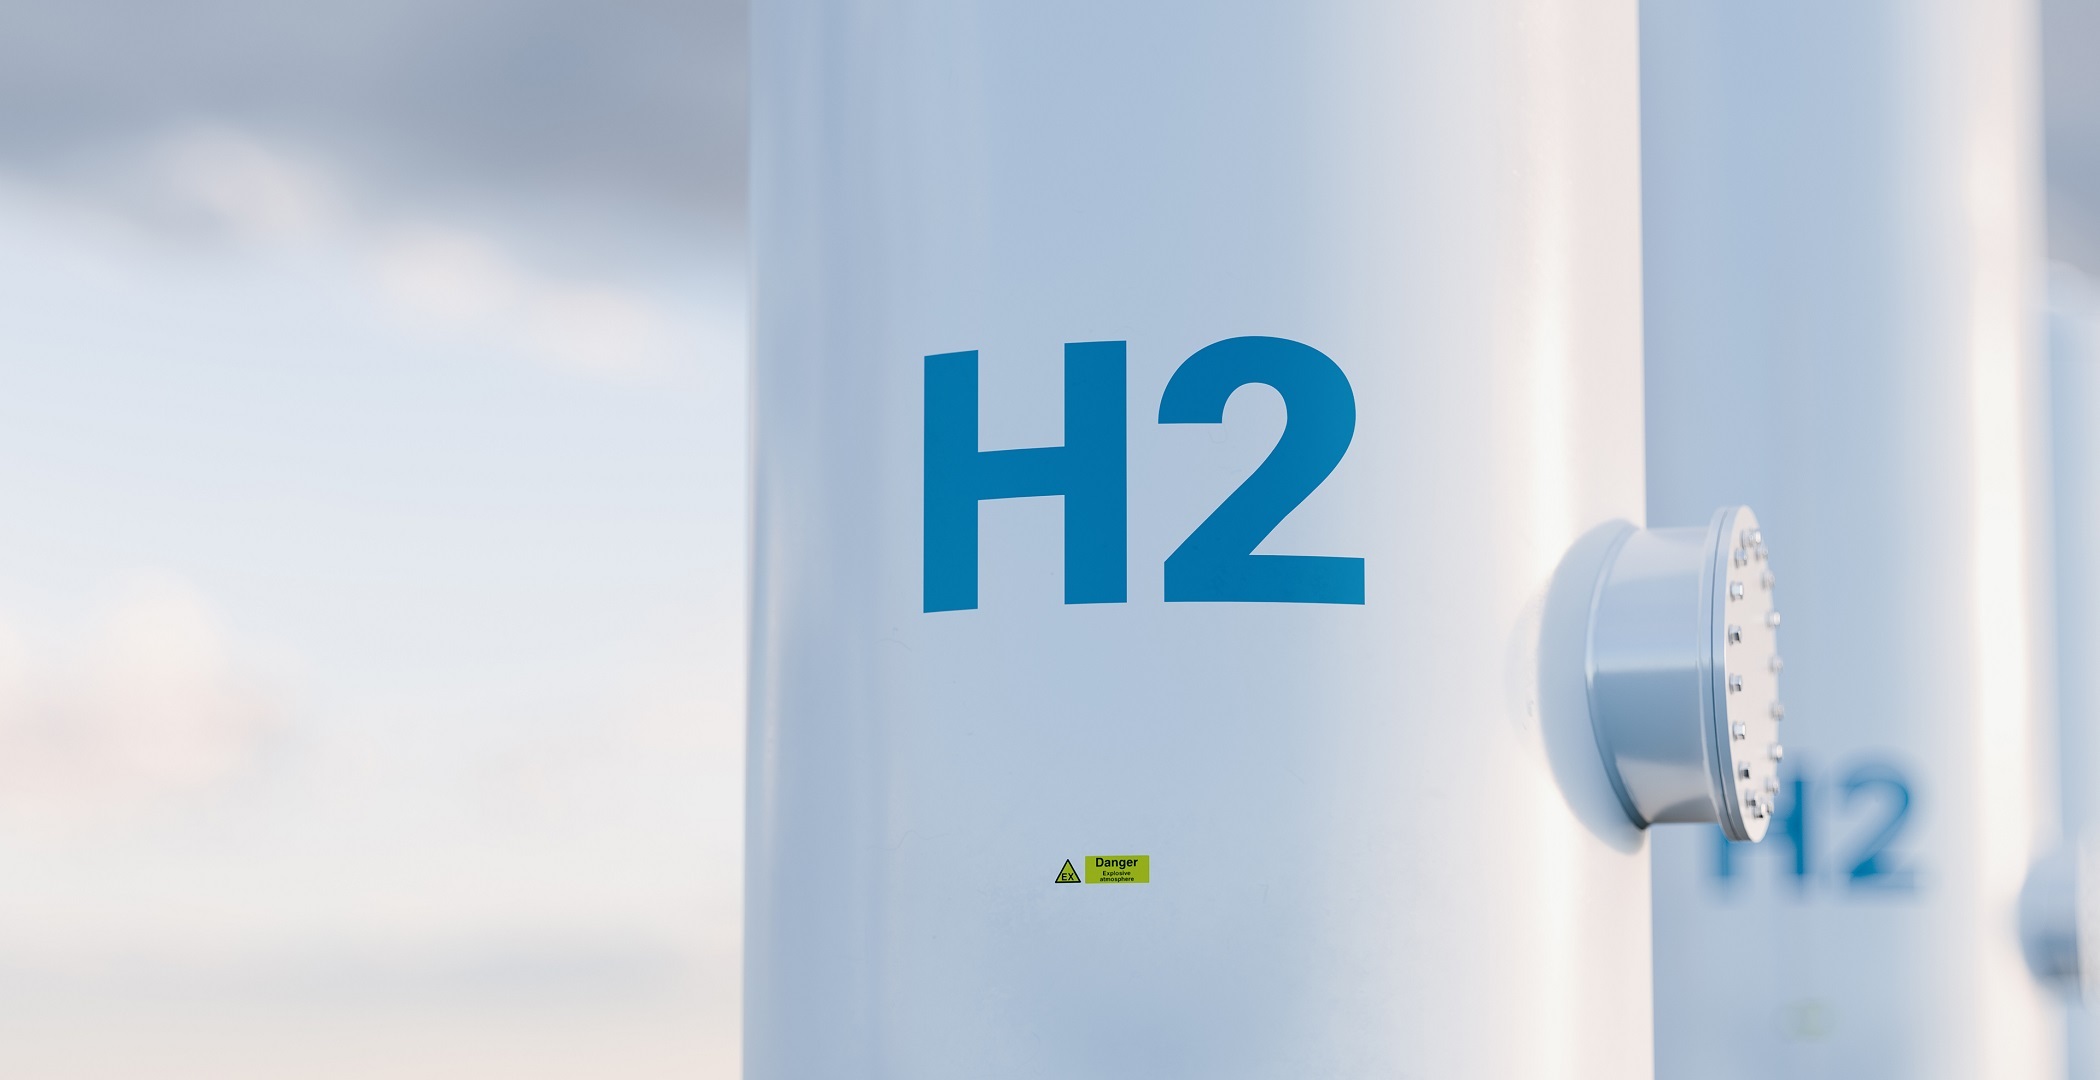 Climate Startup EH2 Raises Nearly $200 Million to Scale Green Hydrogen Tech